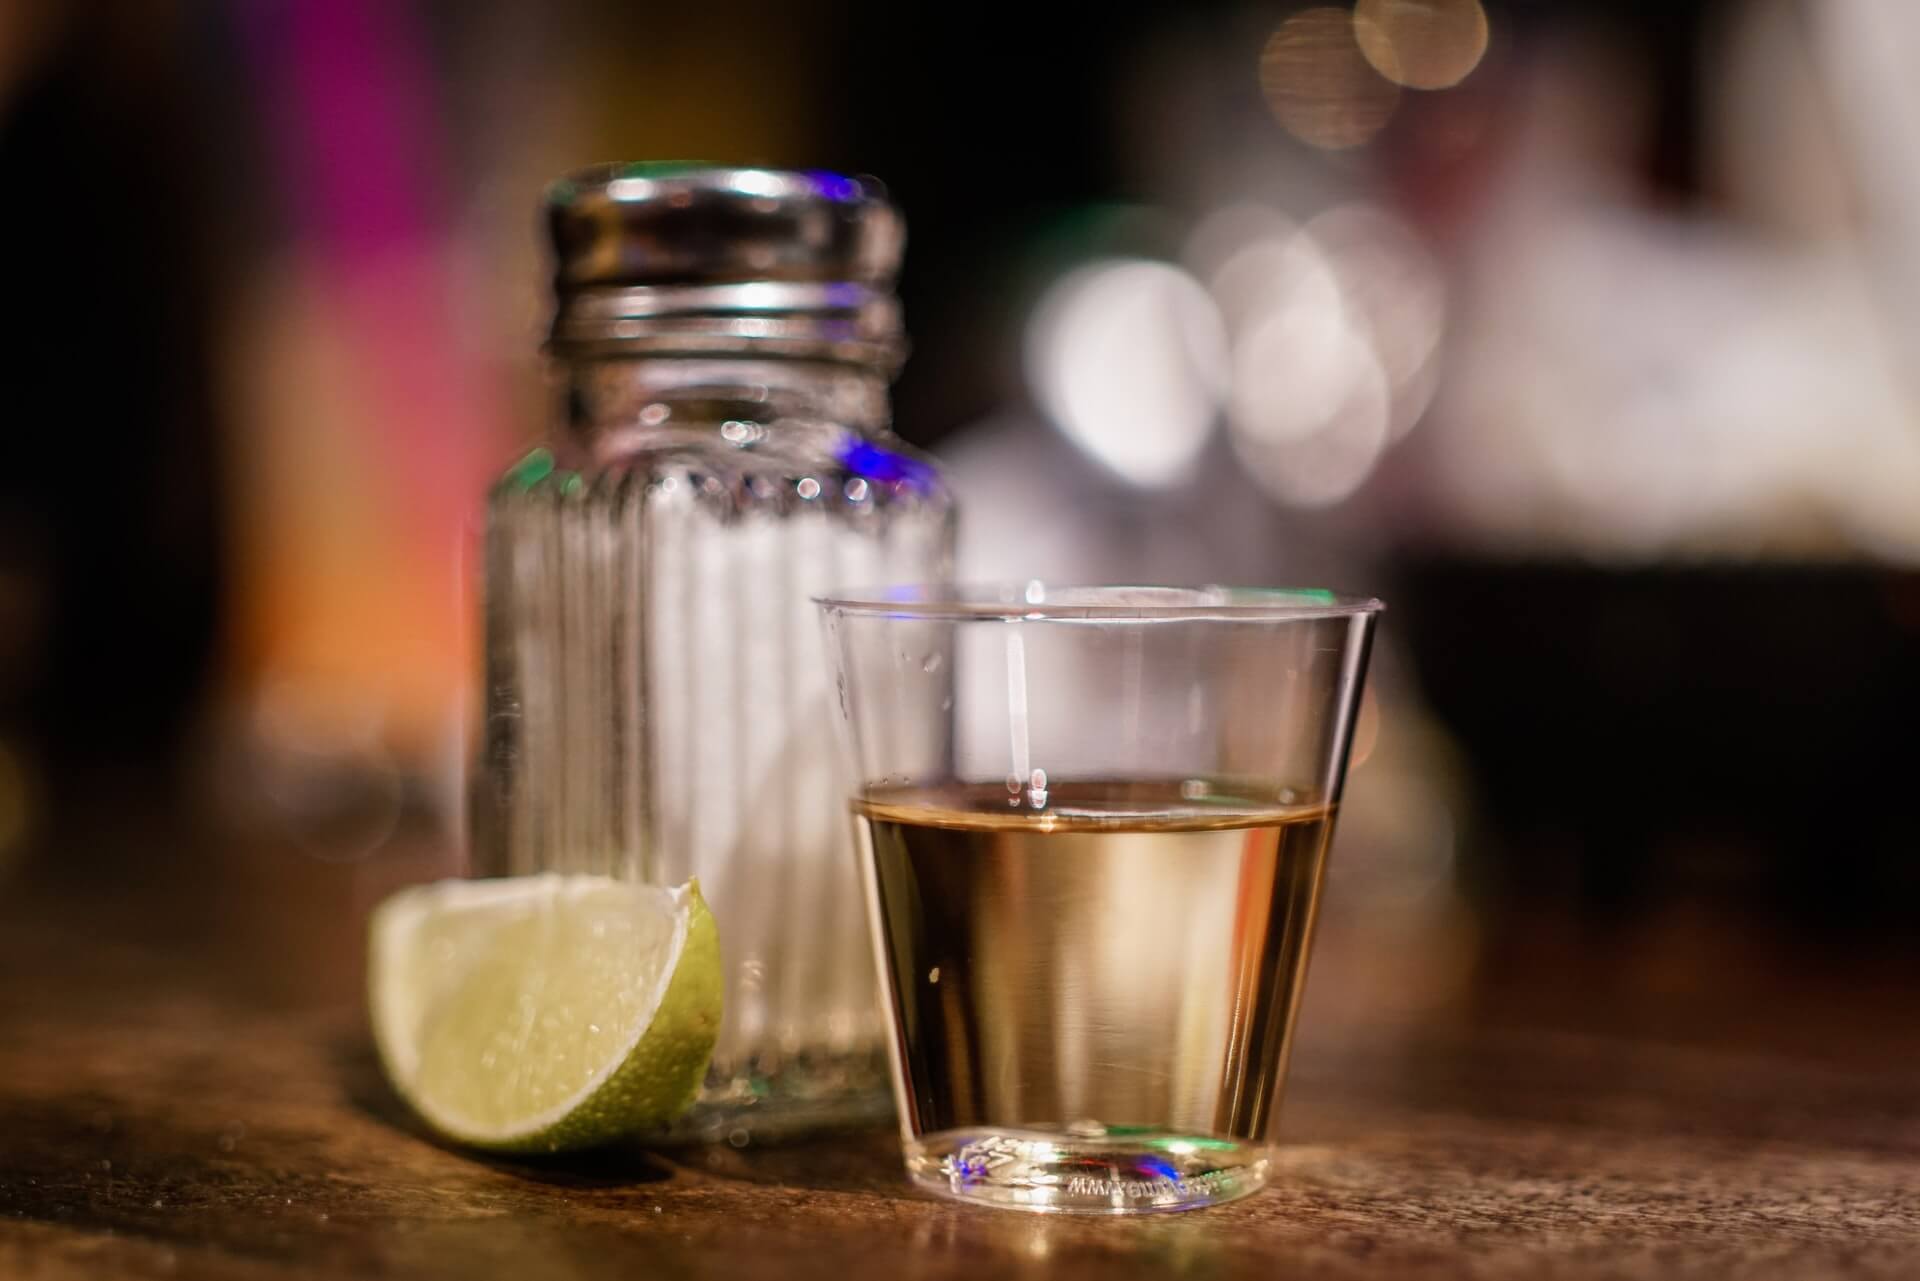 A shot of tequila served with salt shaker and lime wedge